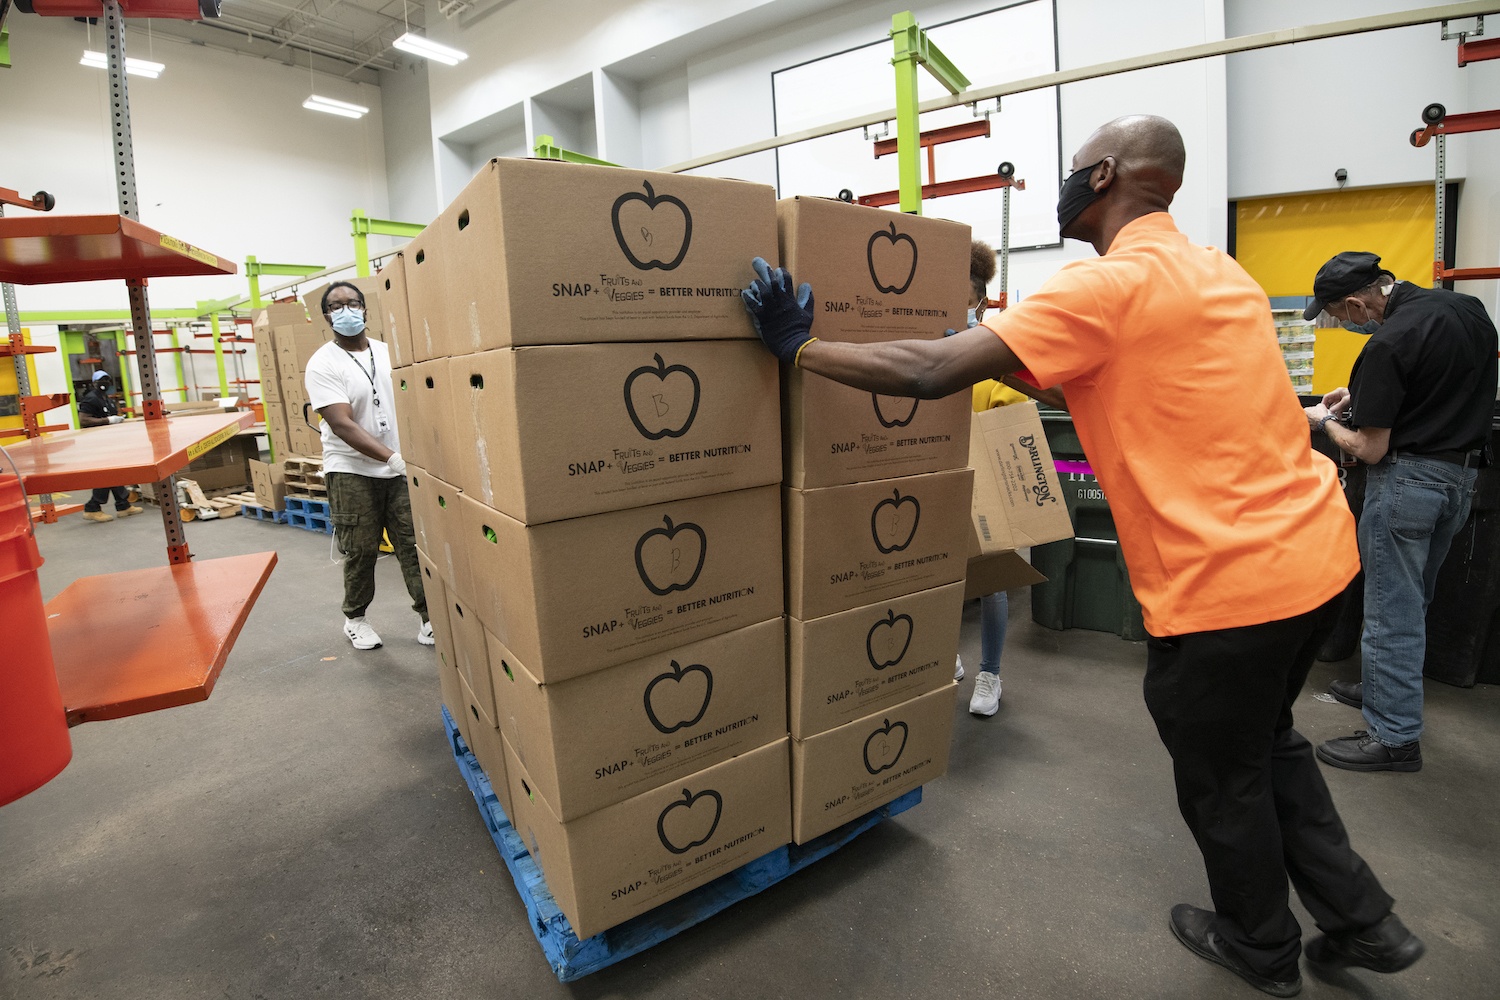 Houston Food Bank workers transporting SNAP fruit and veggie boxes, September 2020